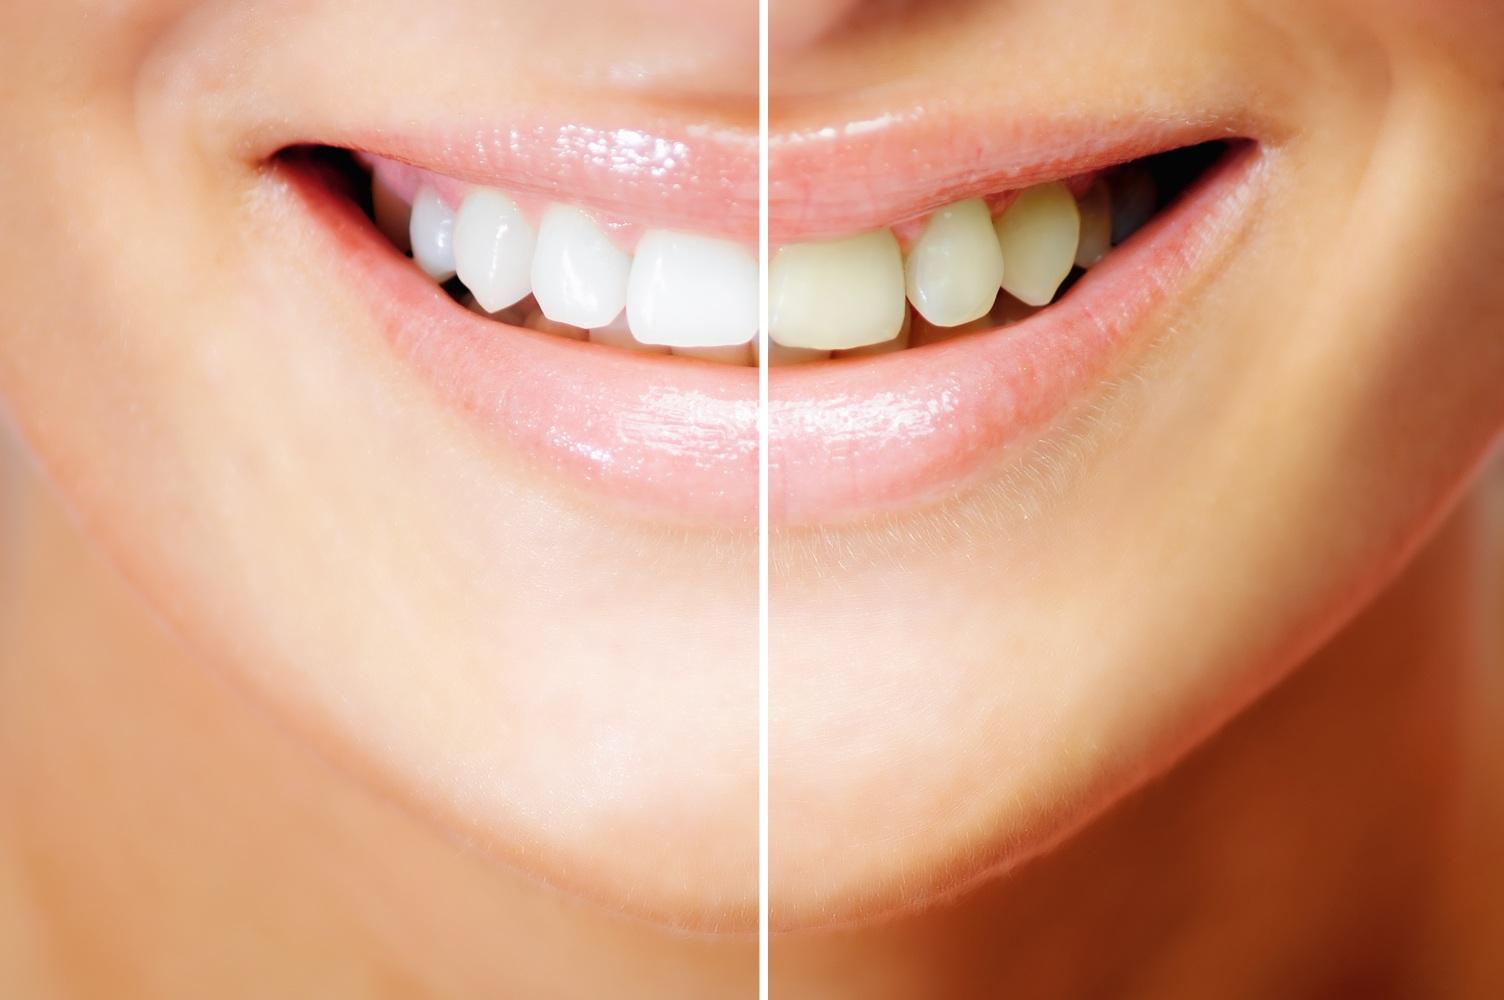 teeth-whitening-results2